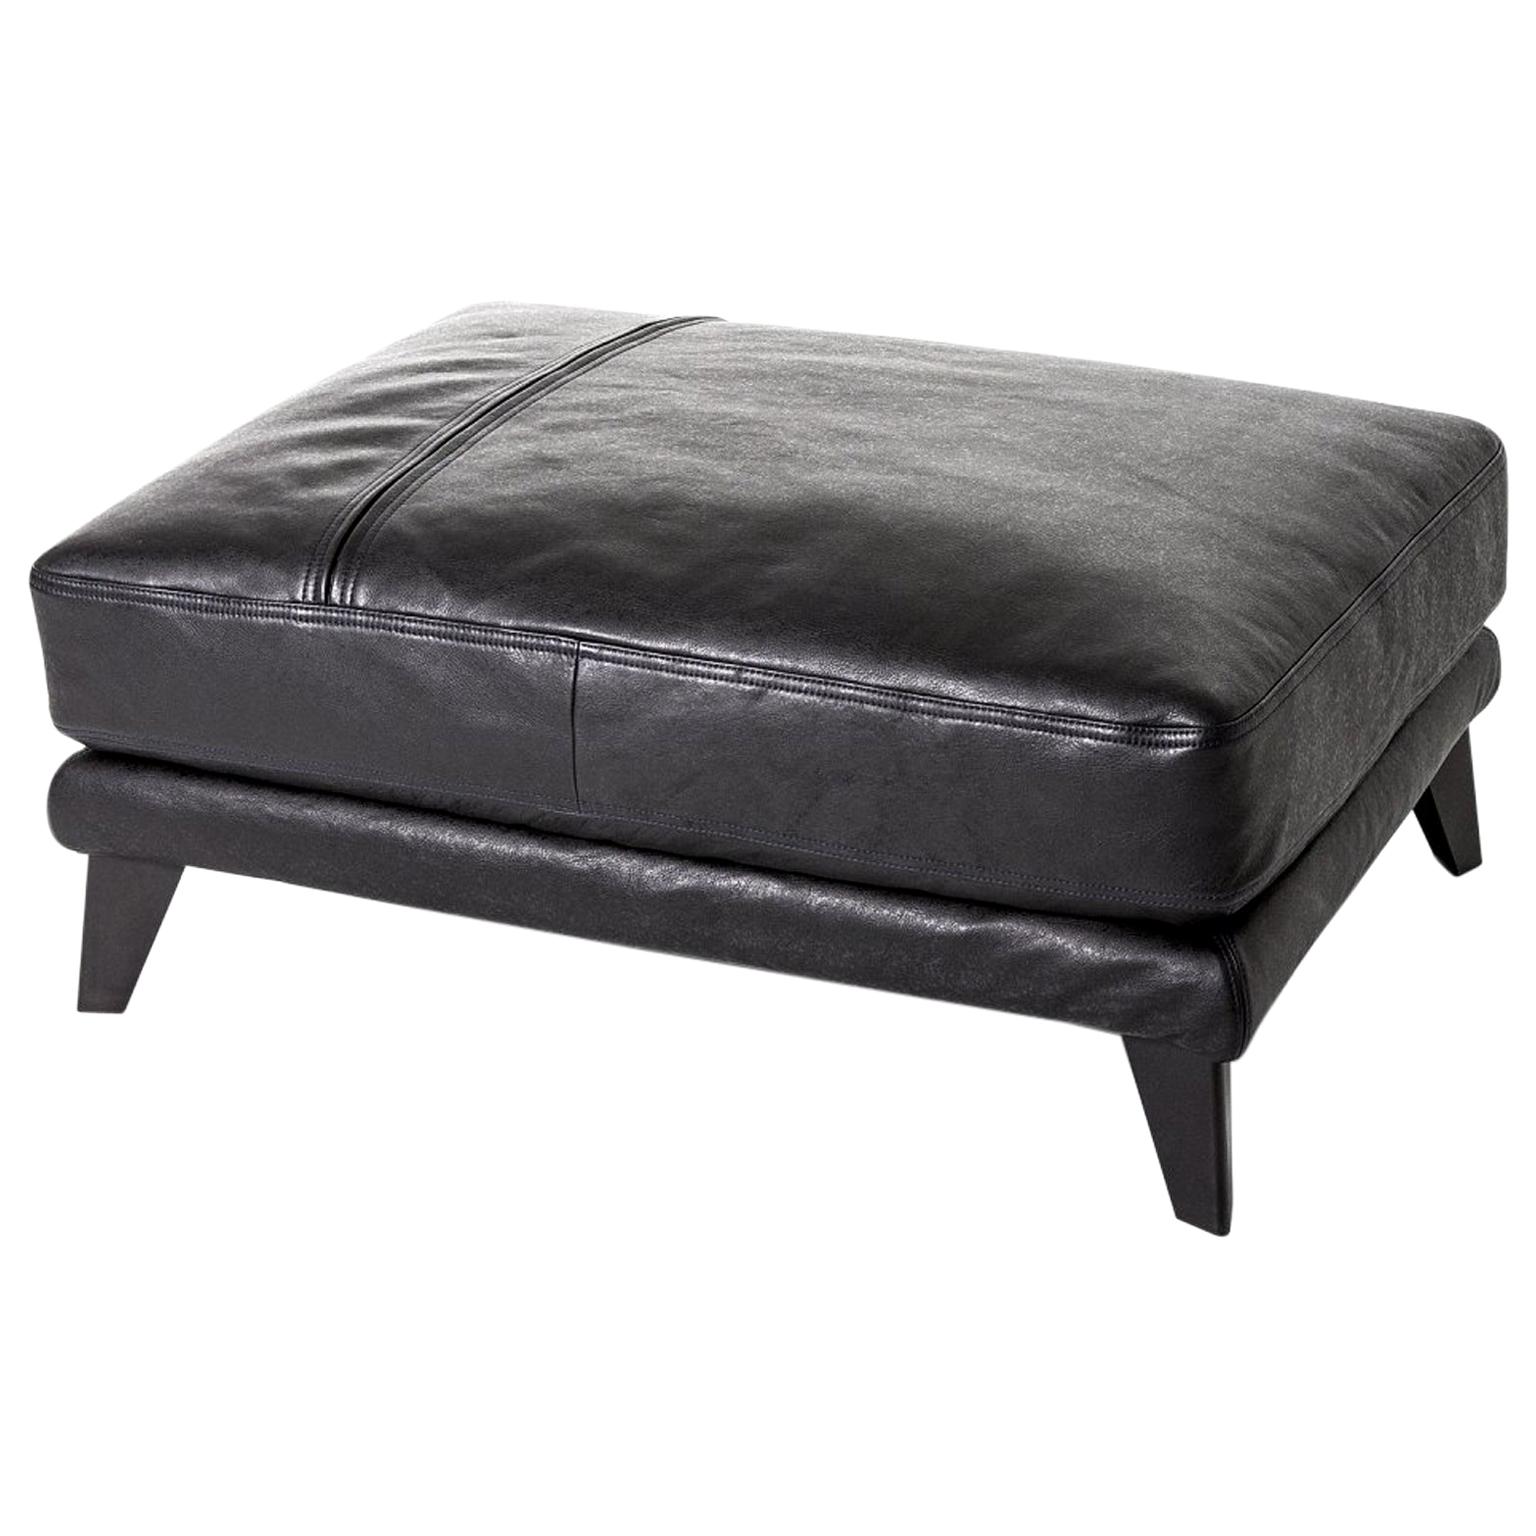 "Gimme More" Leather Covered Ottoman with Fiber or Goose by Moroso for Diesel For Sale